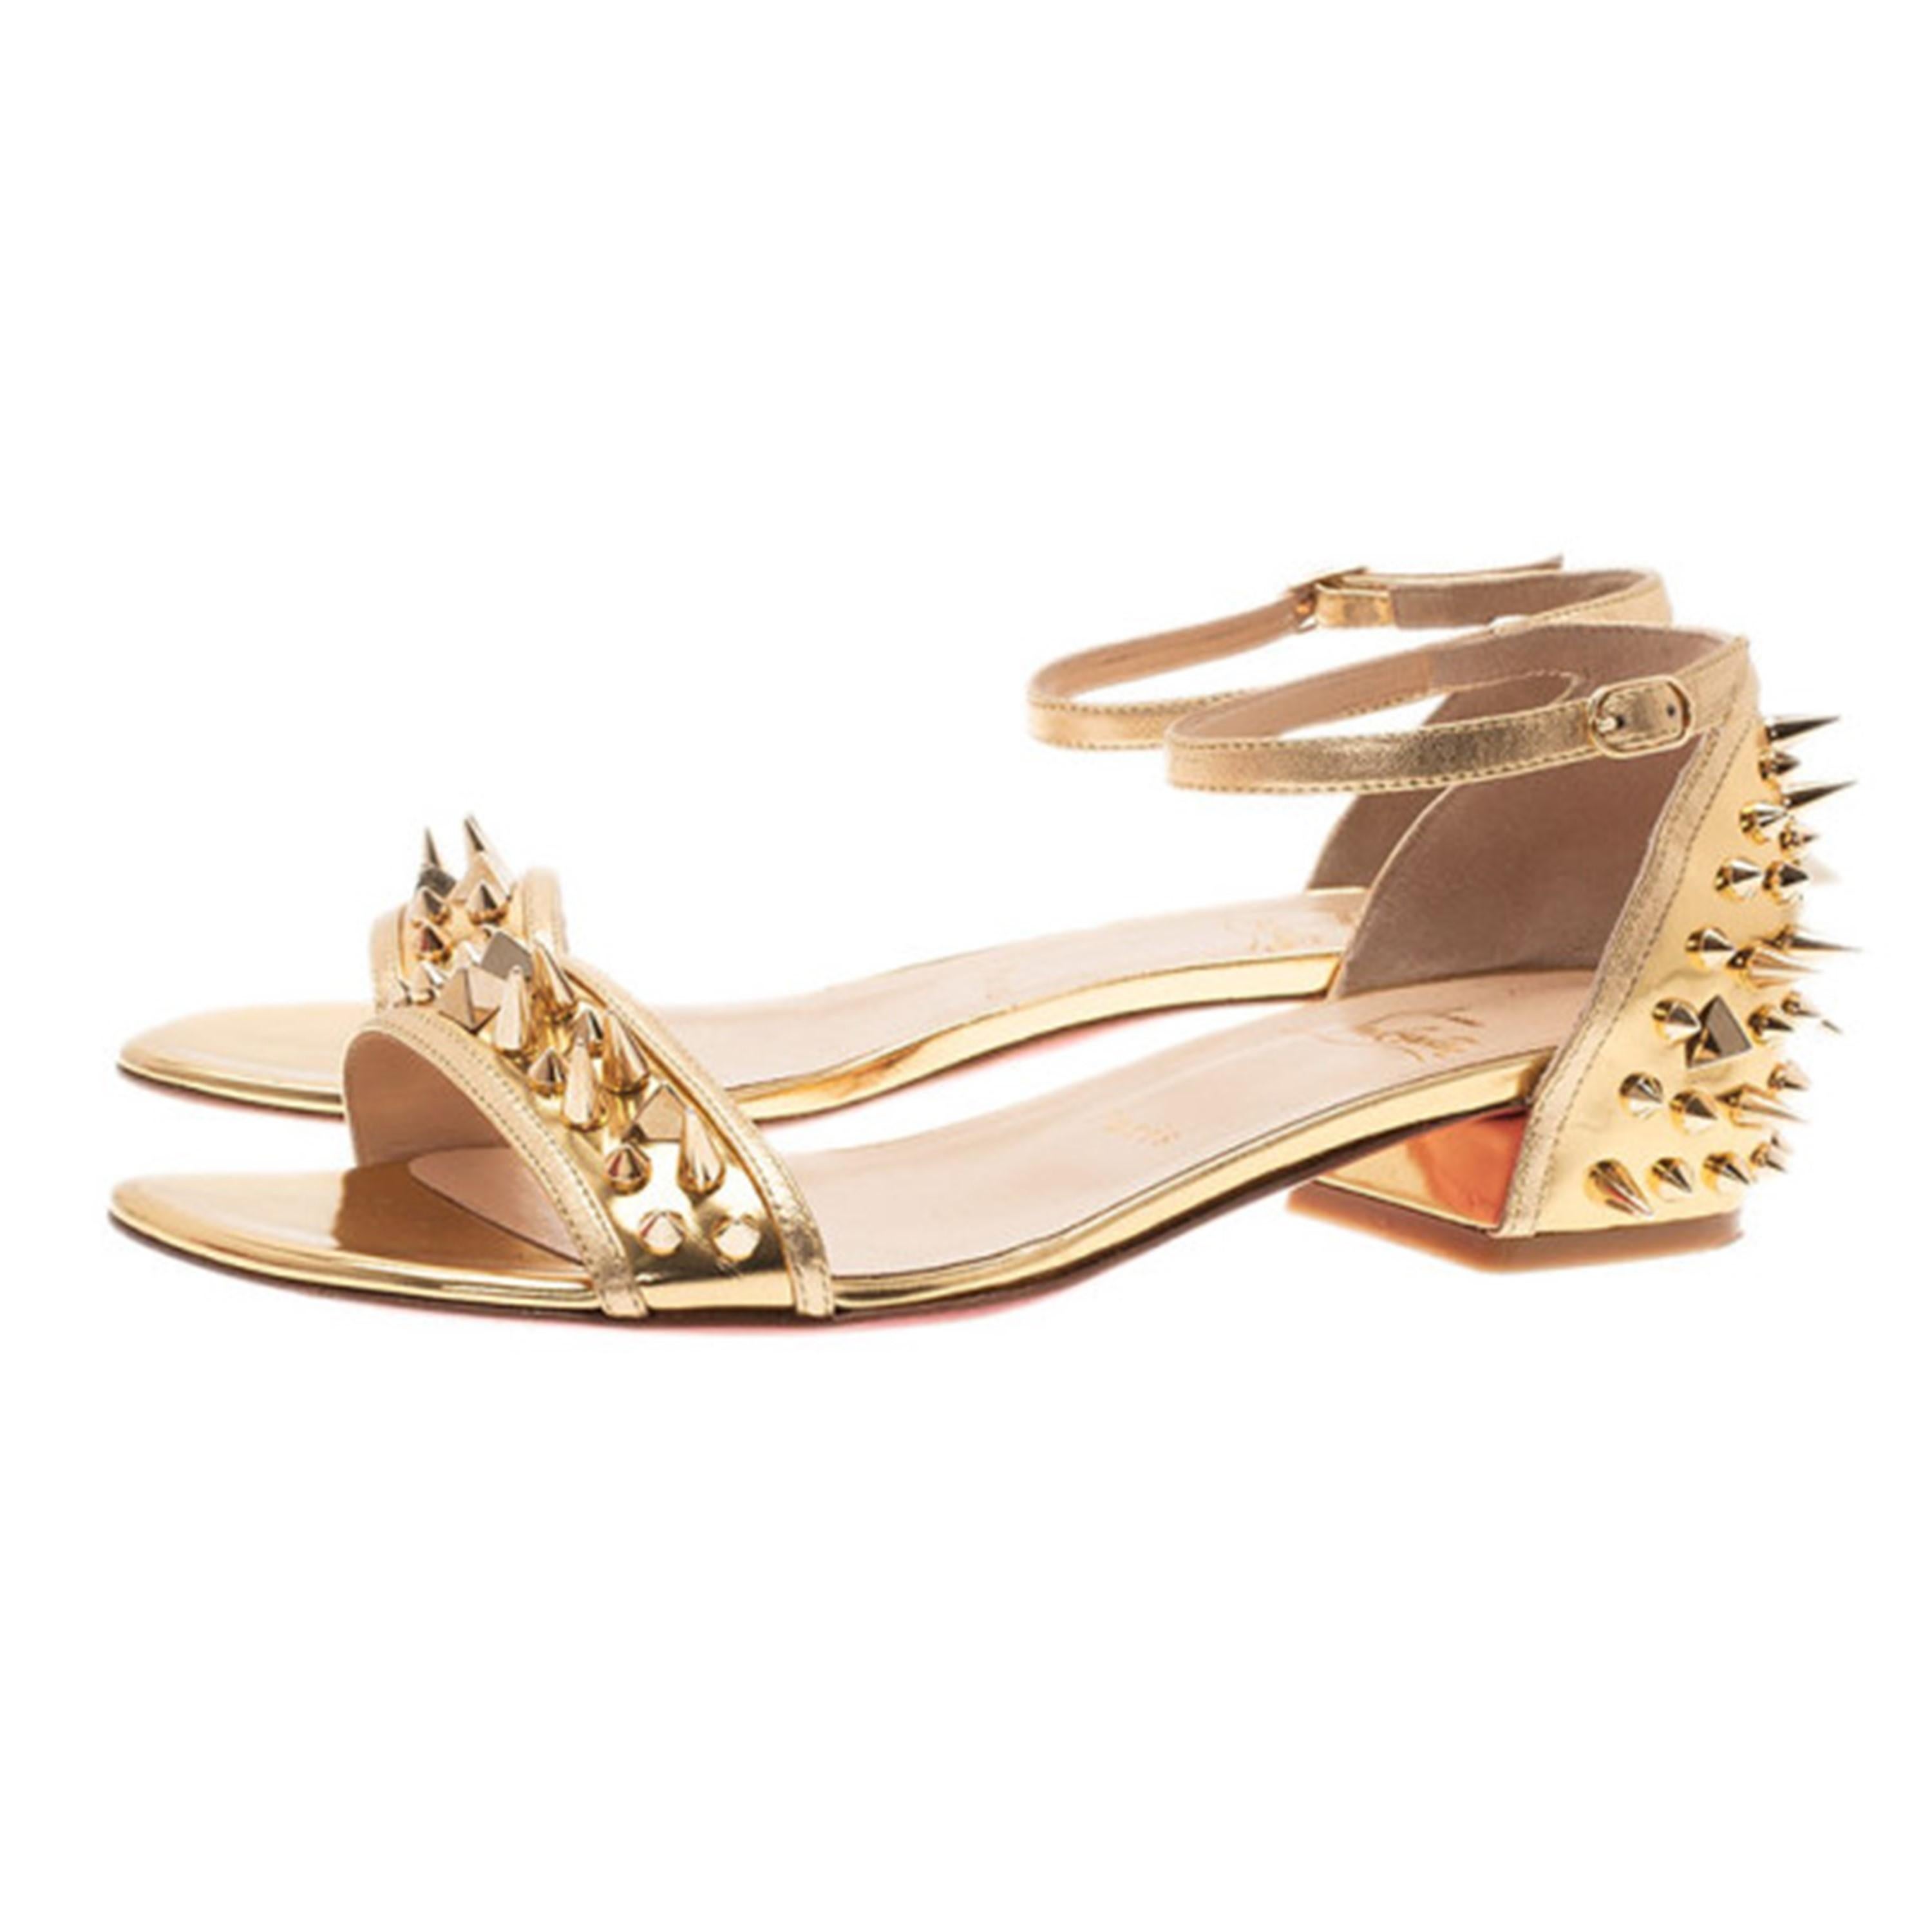 Christian Louboutin Gold Spiked Leather Druide Sandals Size 38 4